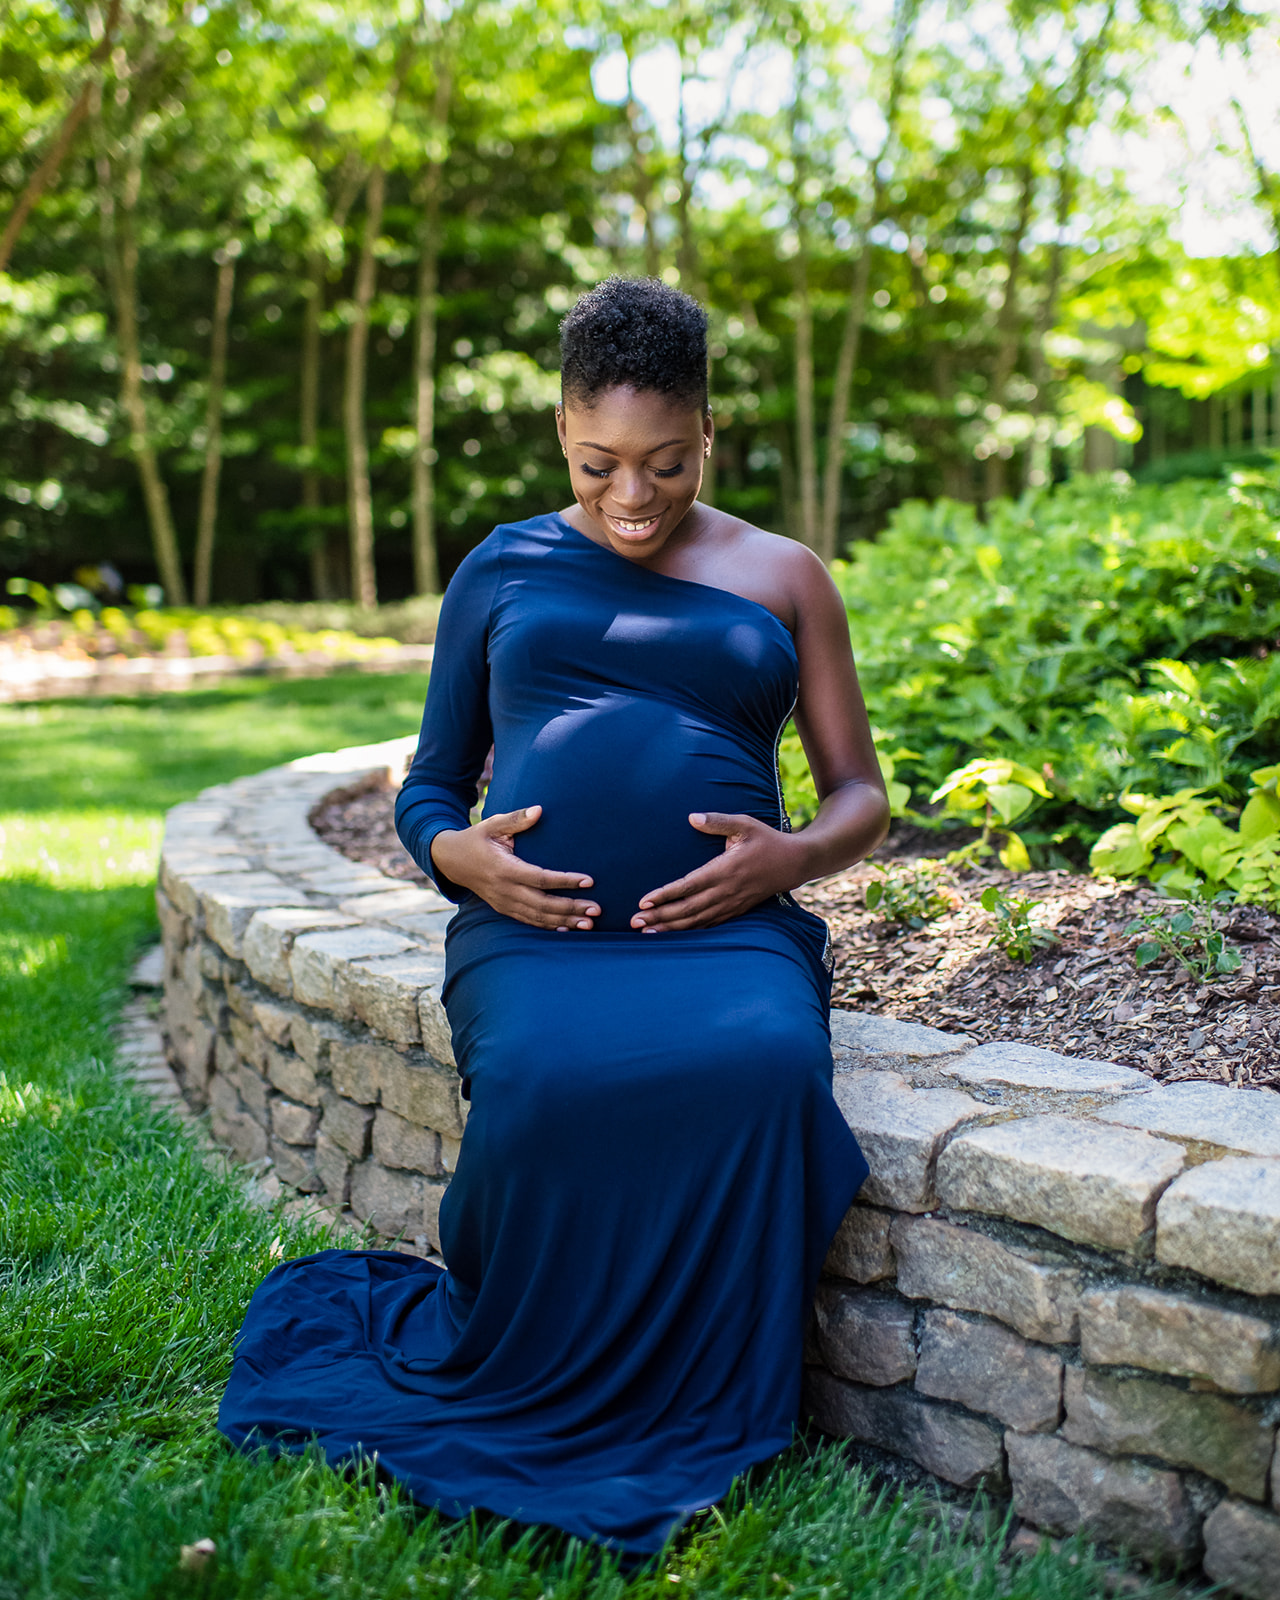 Stunning Portrait Photography Maternity photos of client in her lovely blue dress. Maternity photoshoot was done at the King and Queen Building in Sandy Springs.